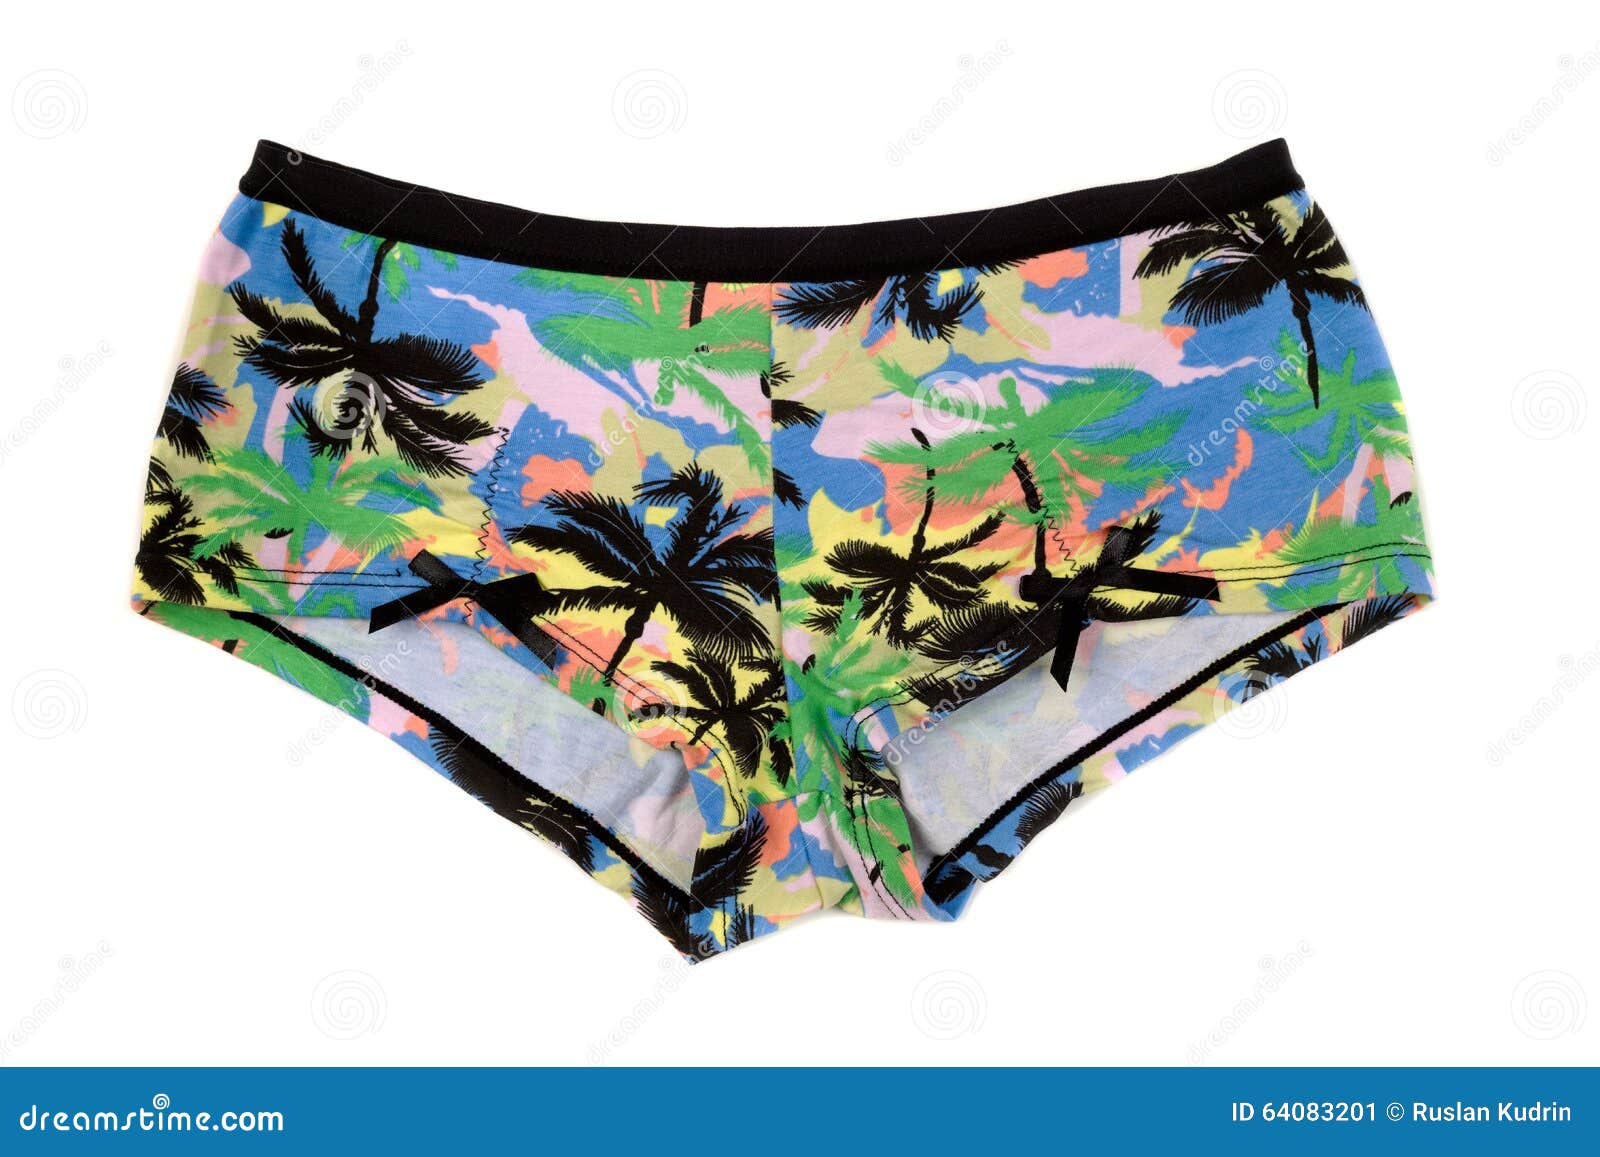 Pants with Pattern of Palm Trees. Stock Image - Image of shorts, boxer